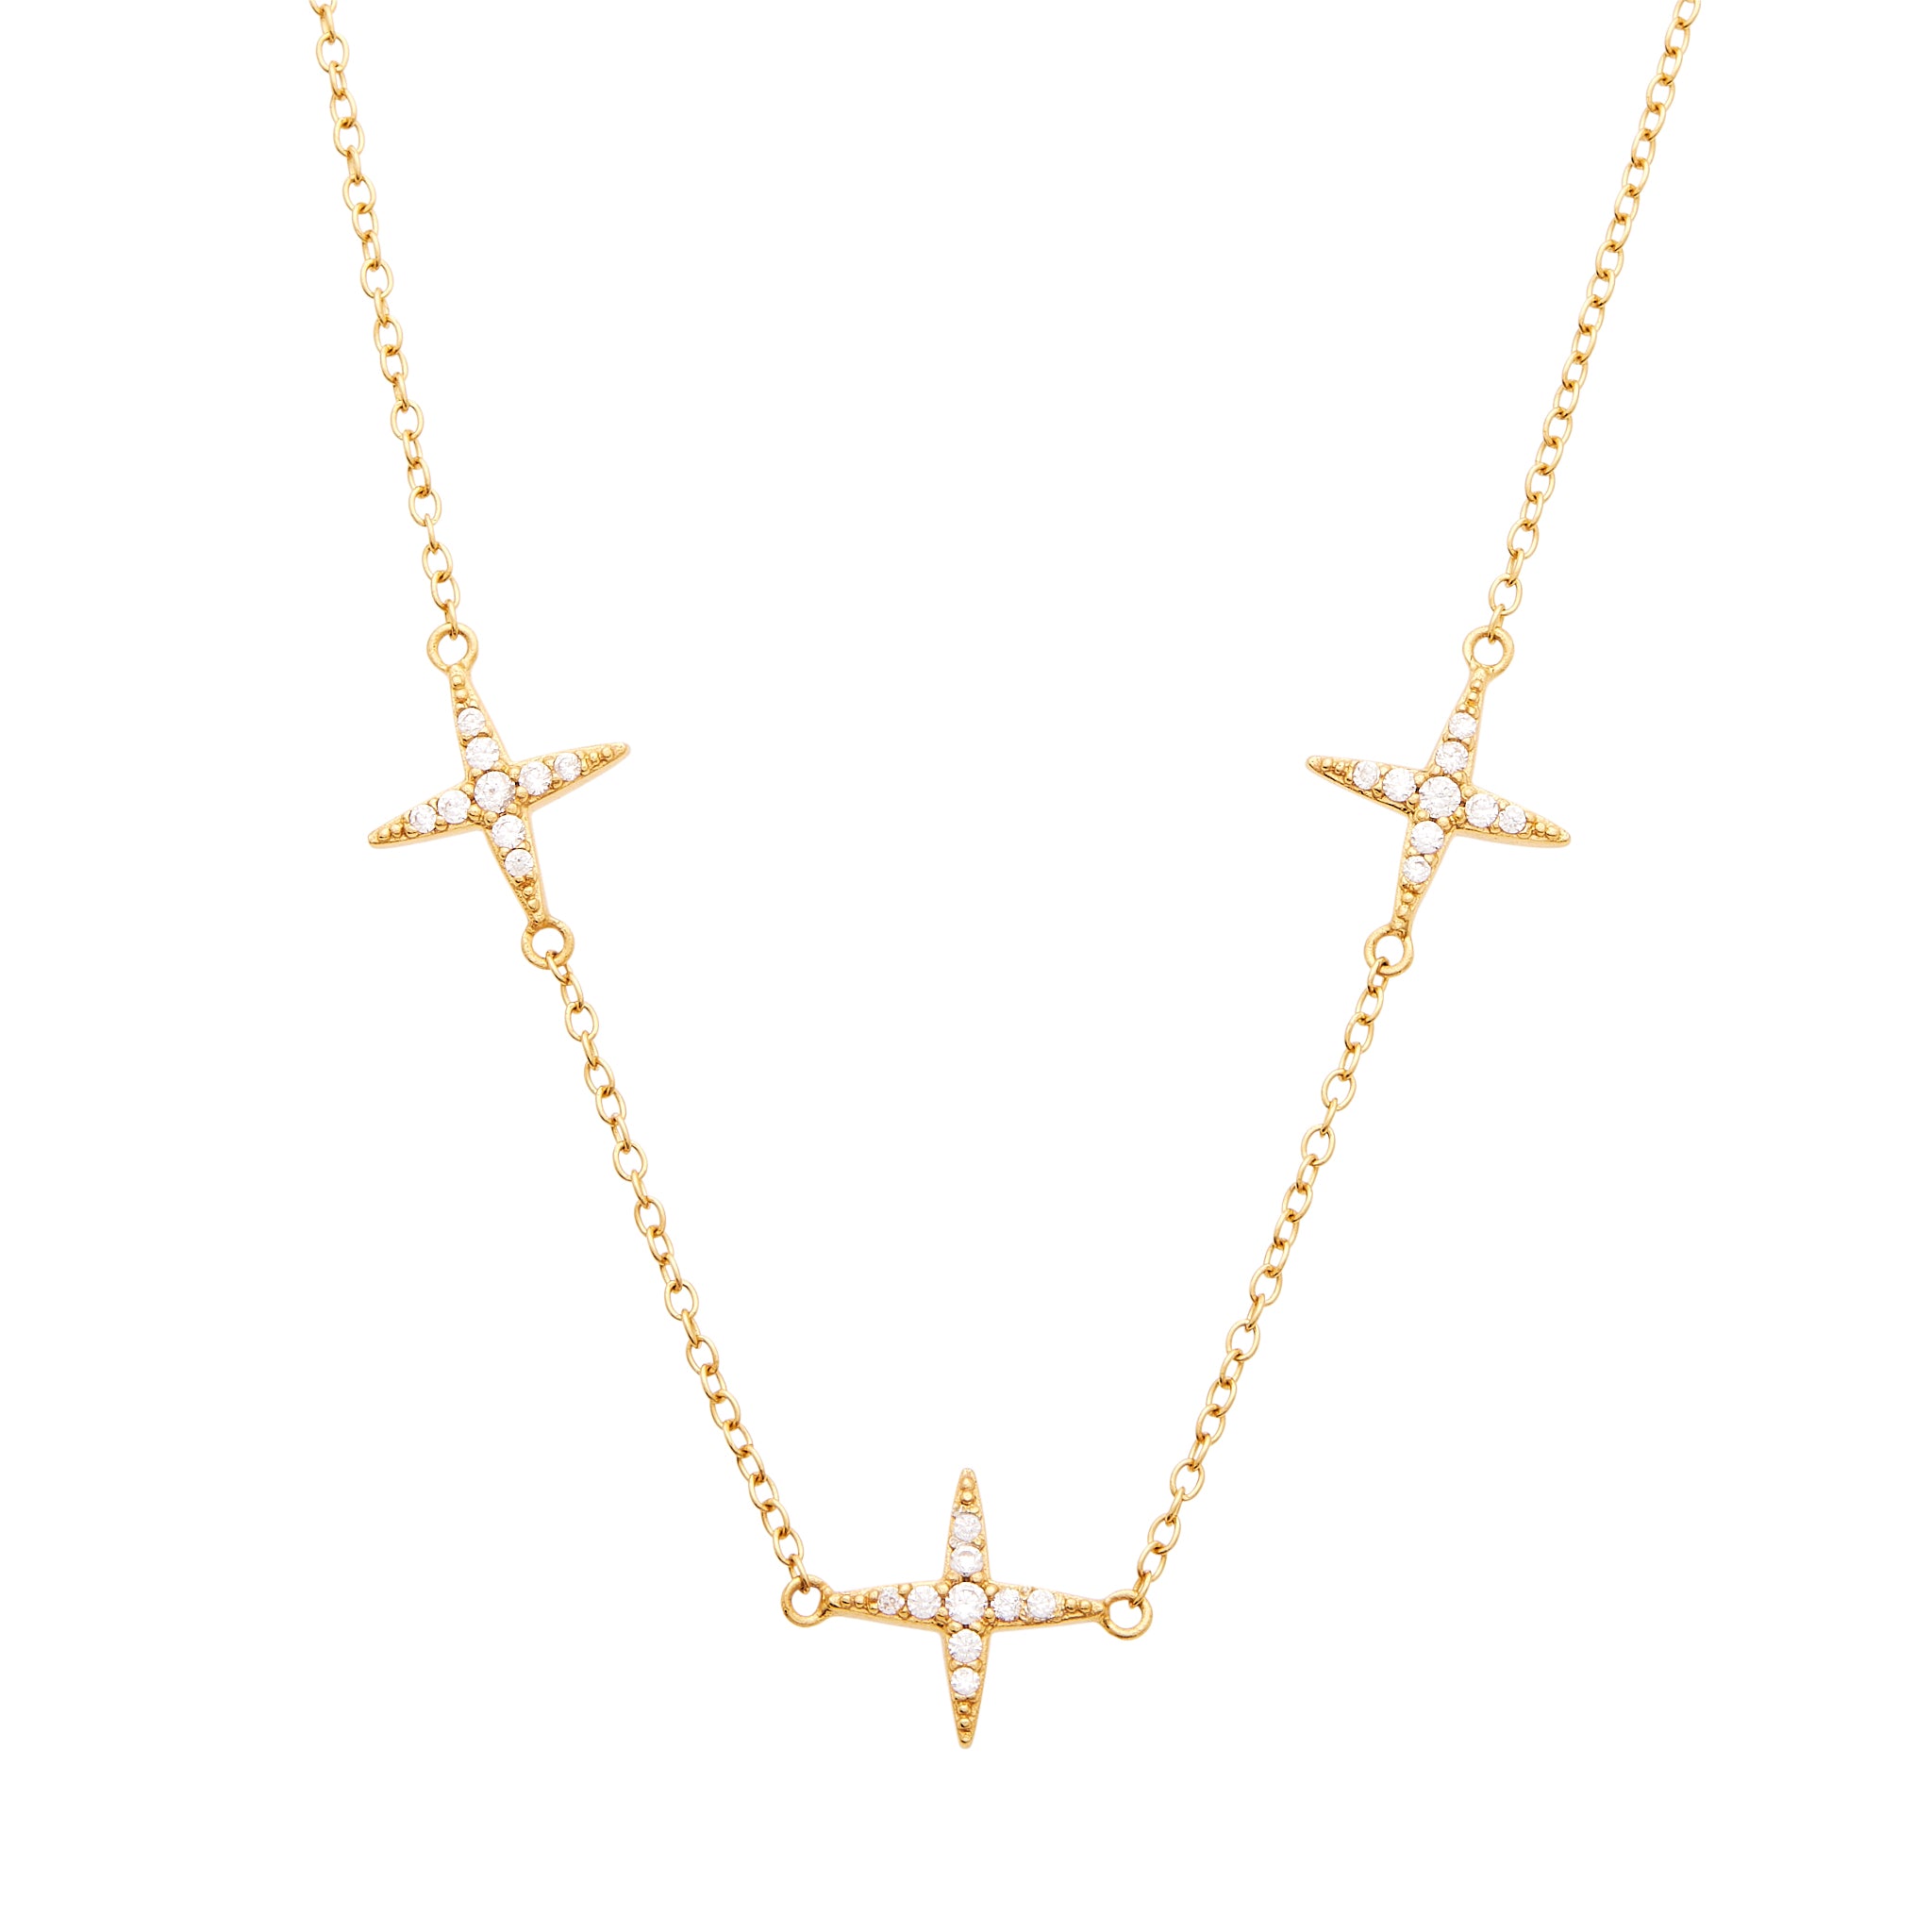 North Star Choker Necklace Gold